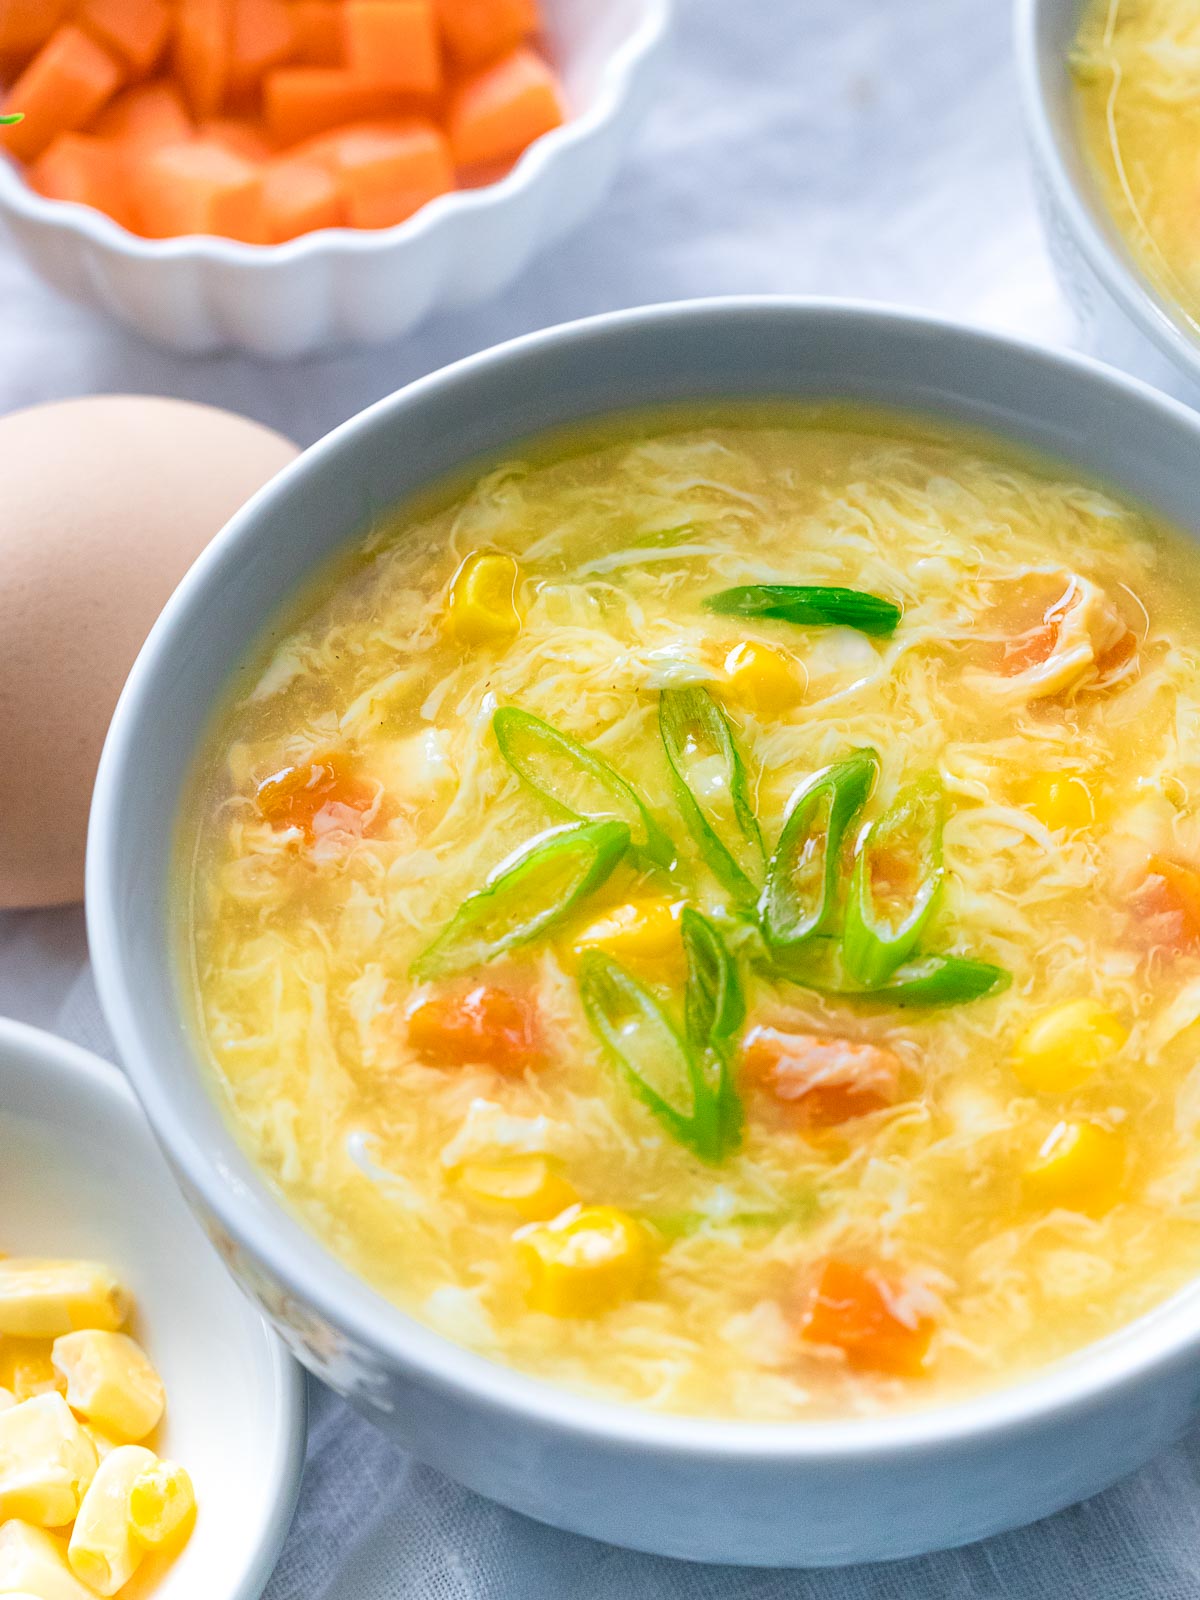 bowl of authentic egg drop soup with corn, carrots, and scallions